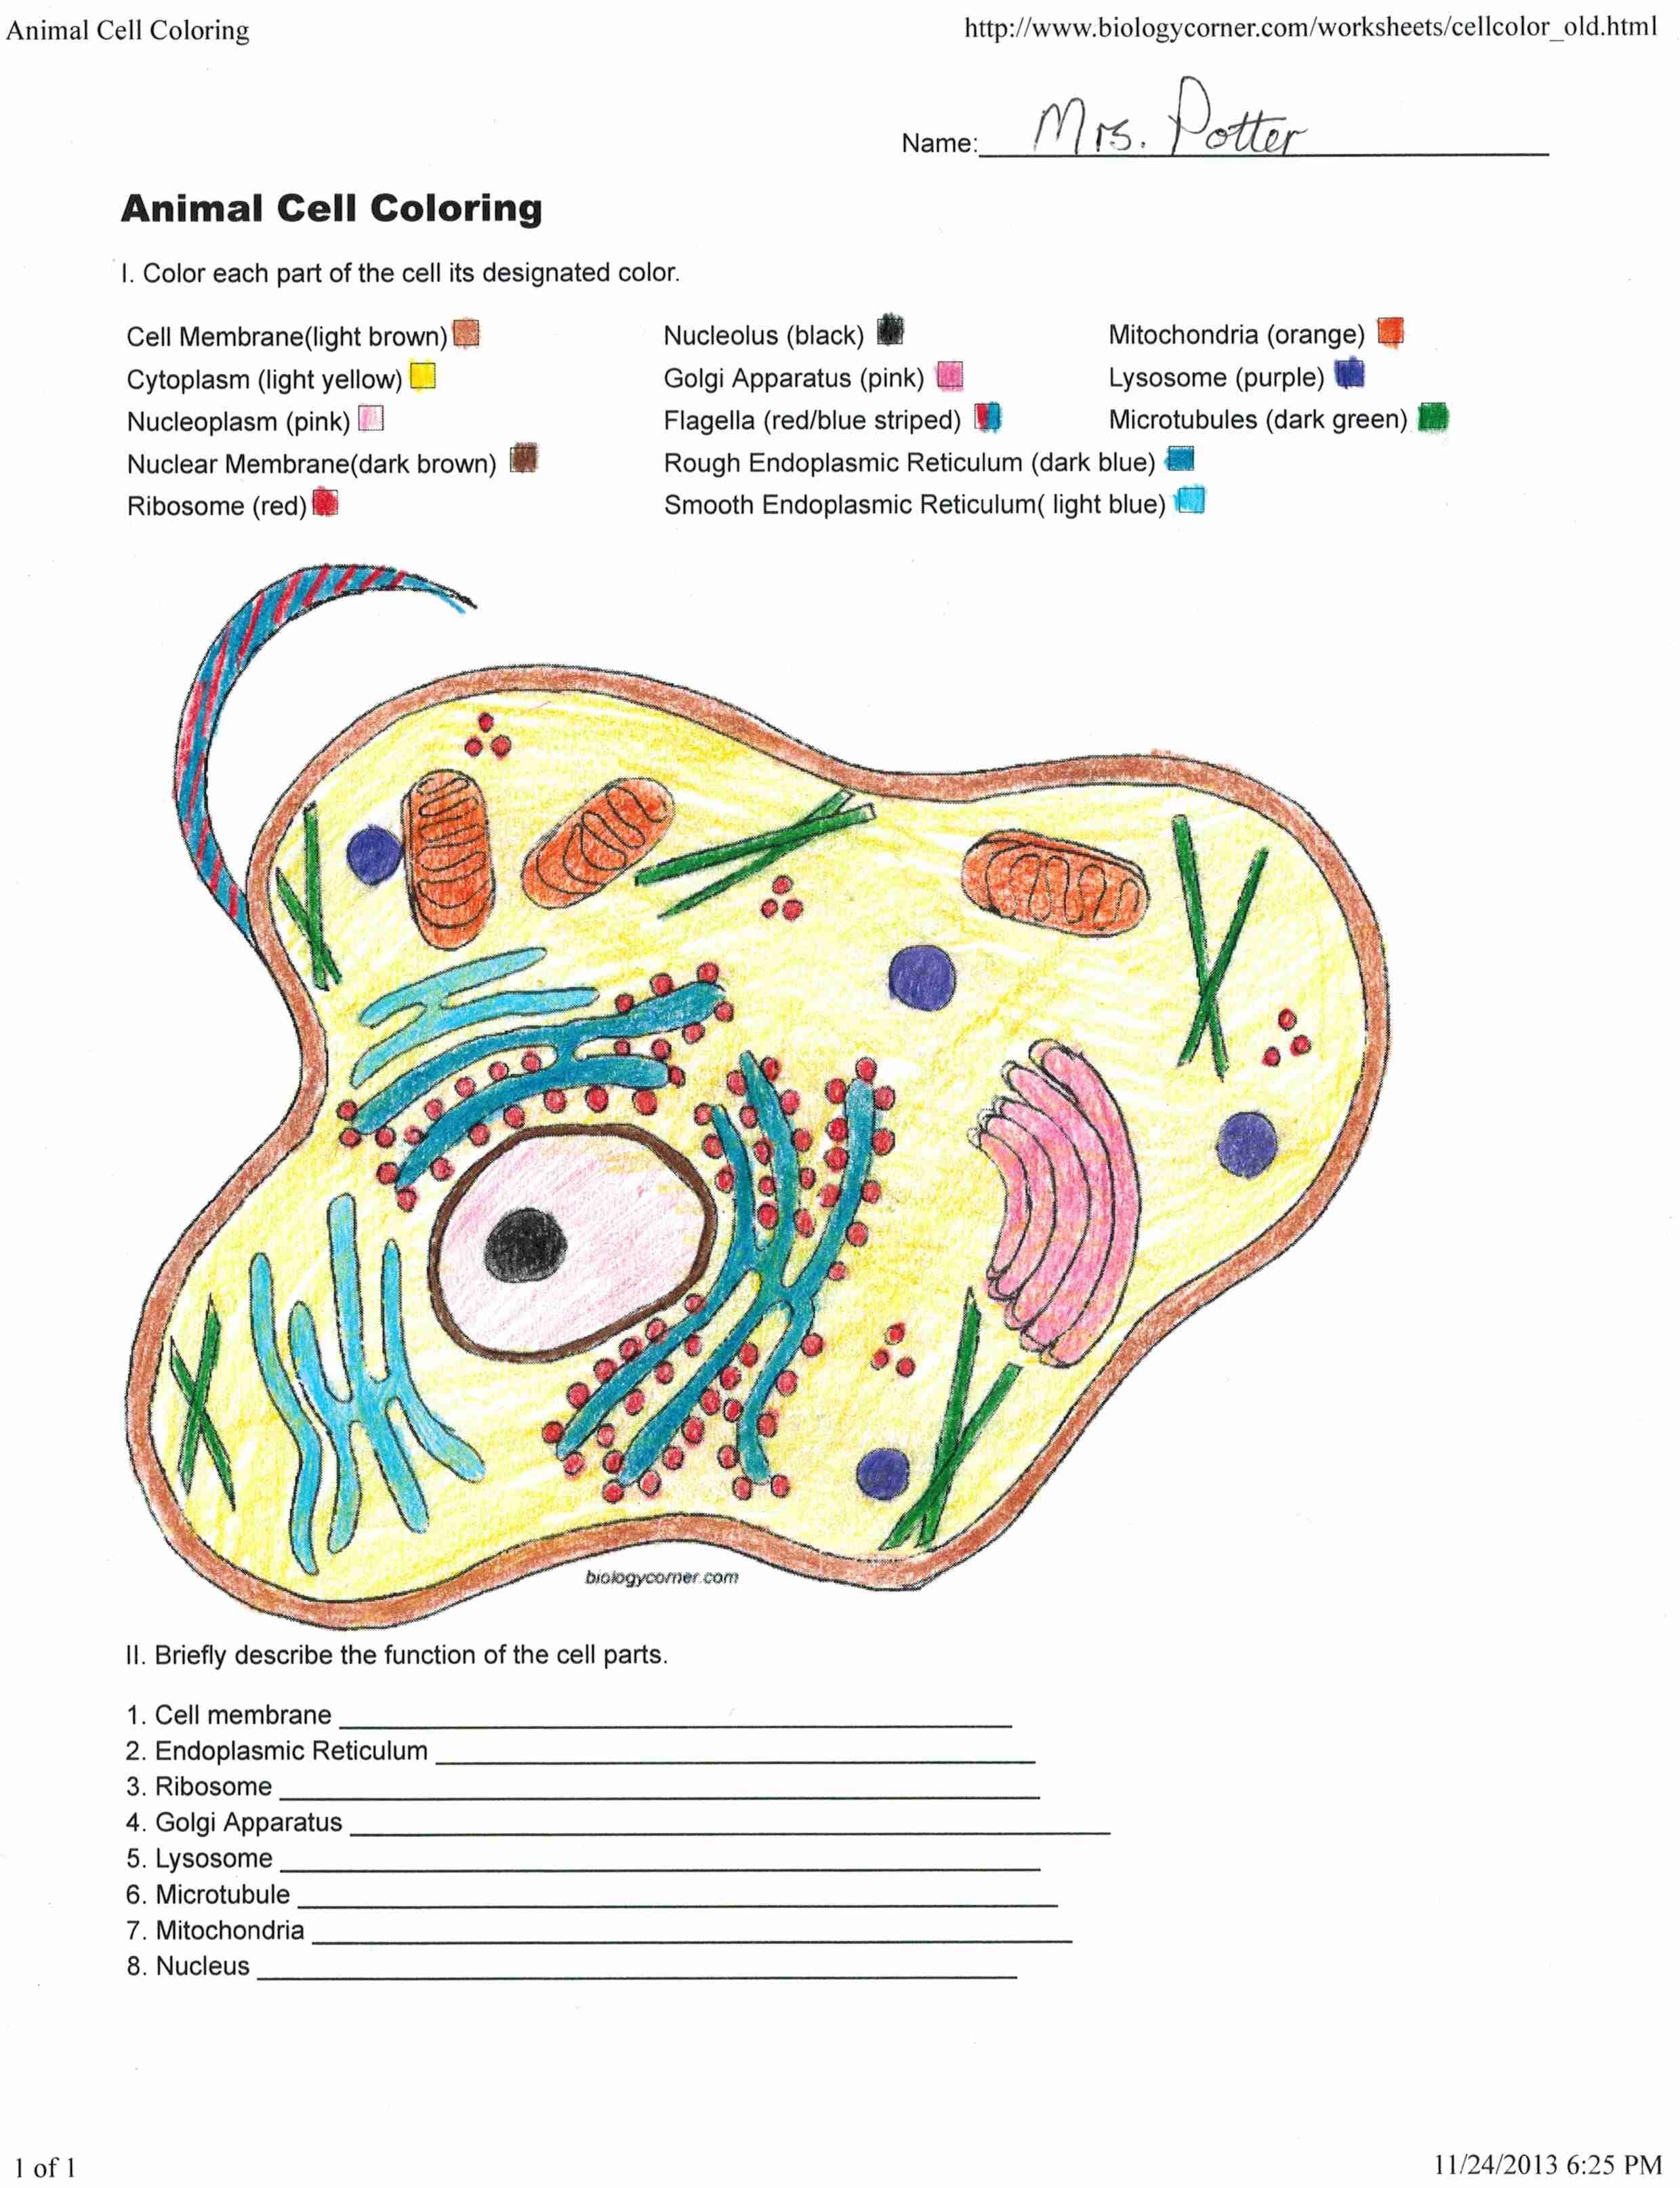 Animal Cell Coloring Answers Wallpaper